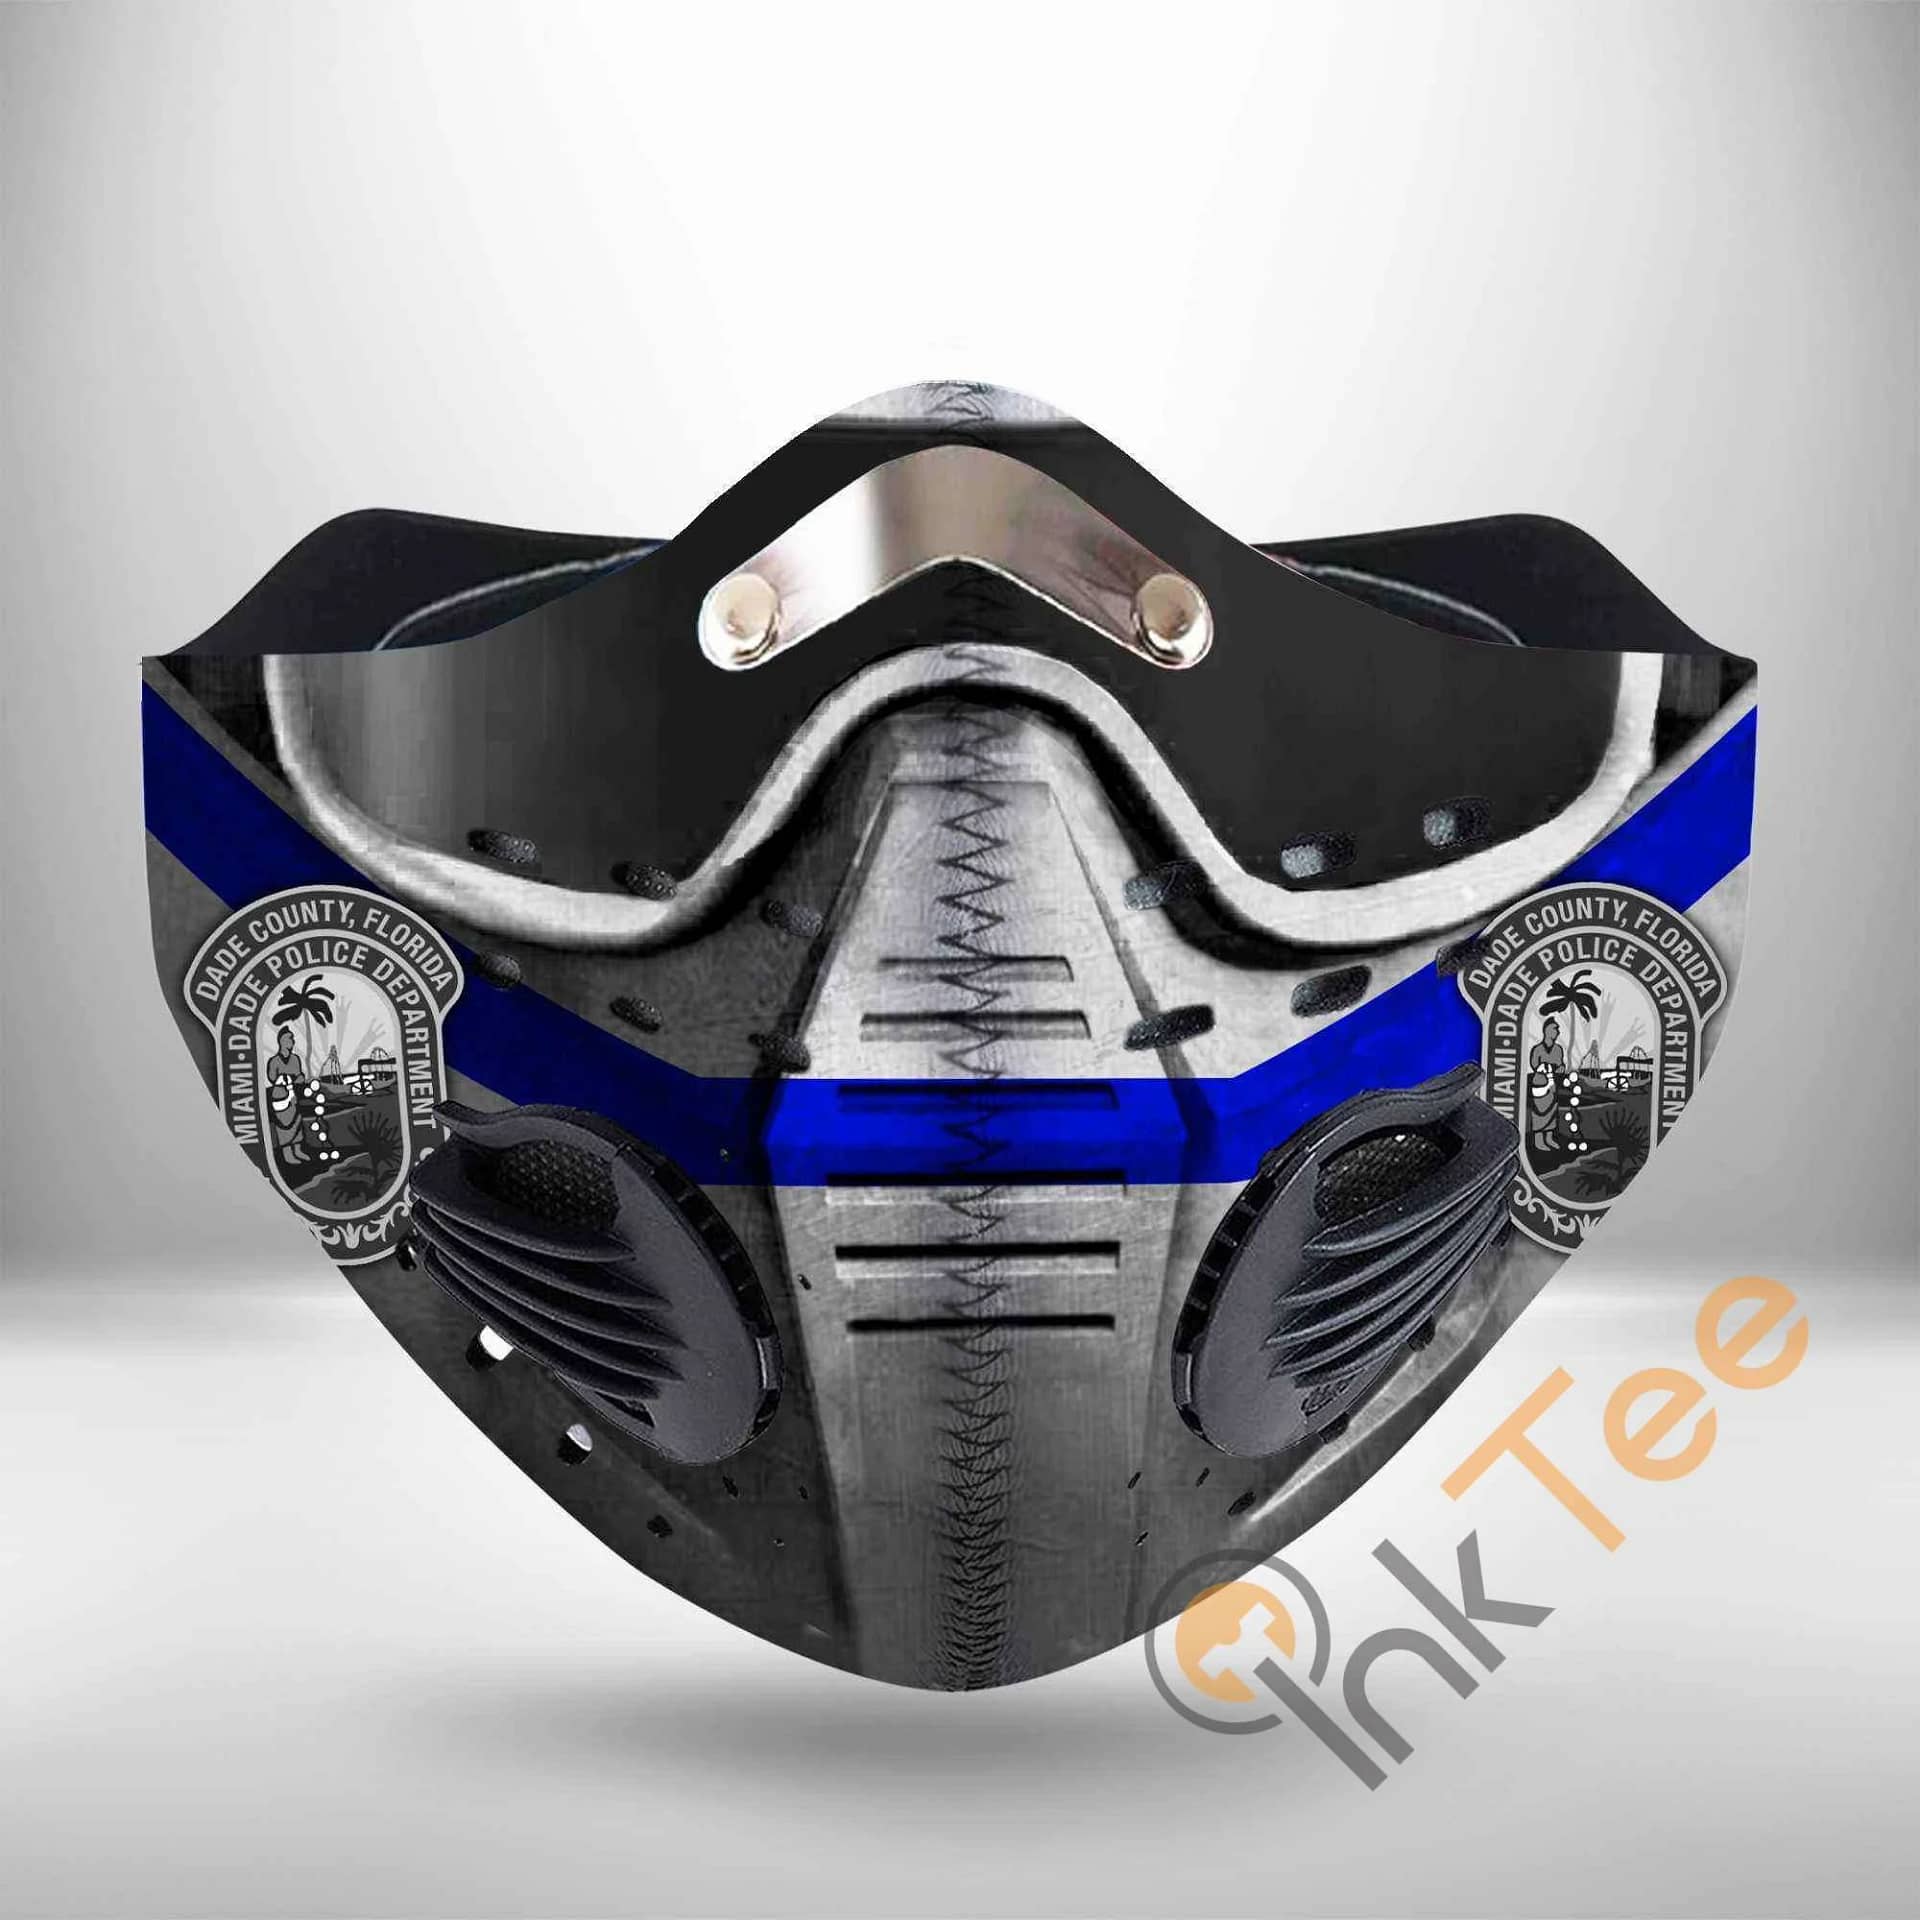 Miami Dade Pd Helmet Filter Activated Carbon Pm 2.5 Face Mask